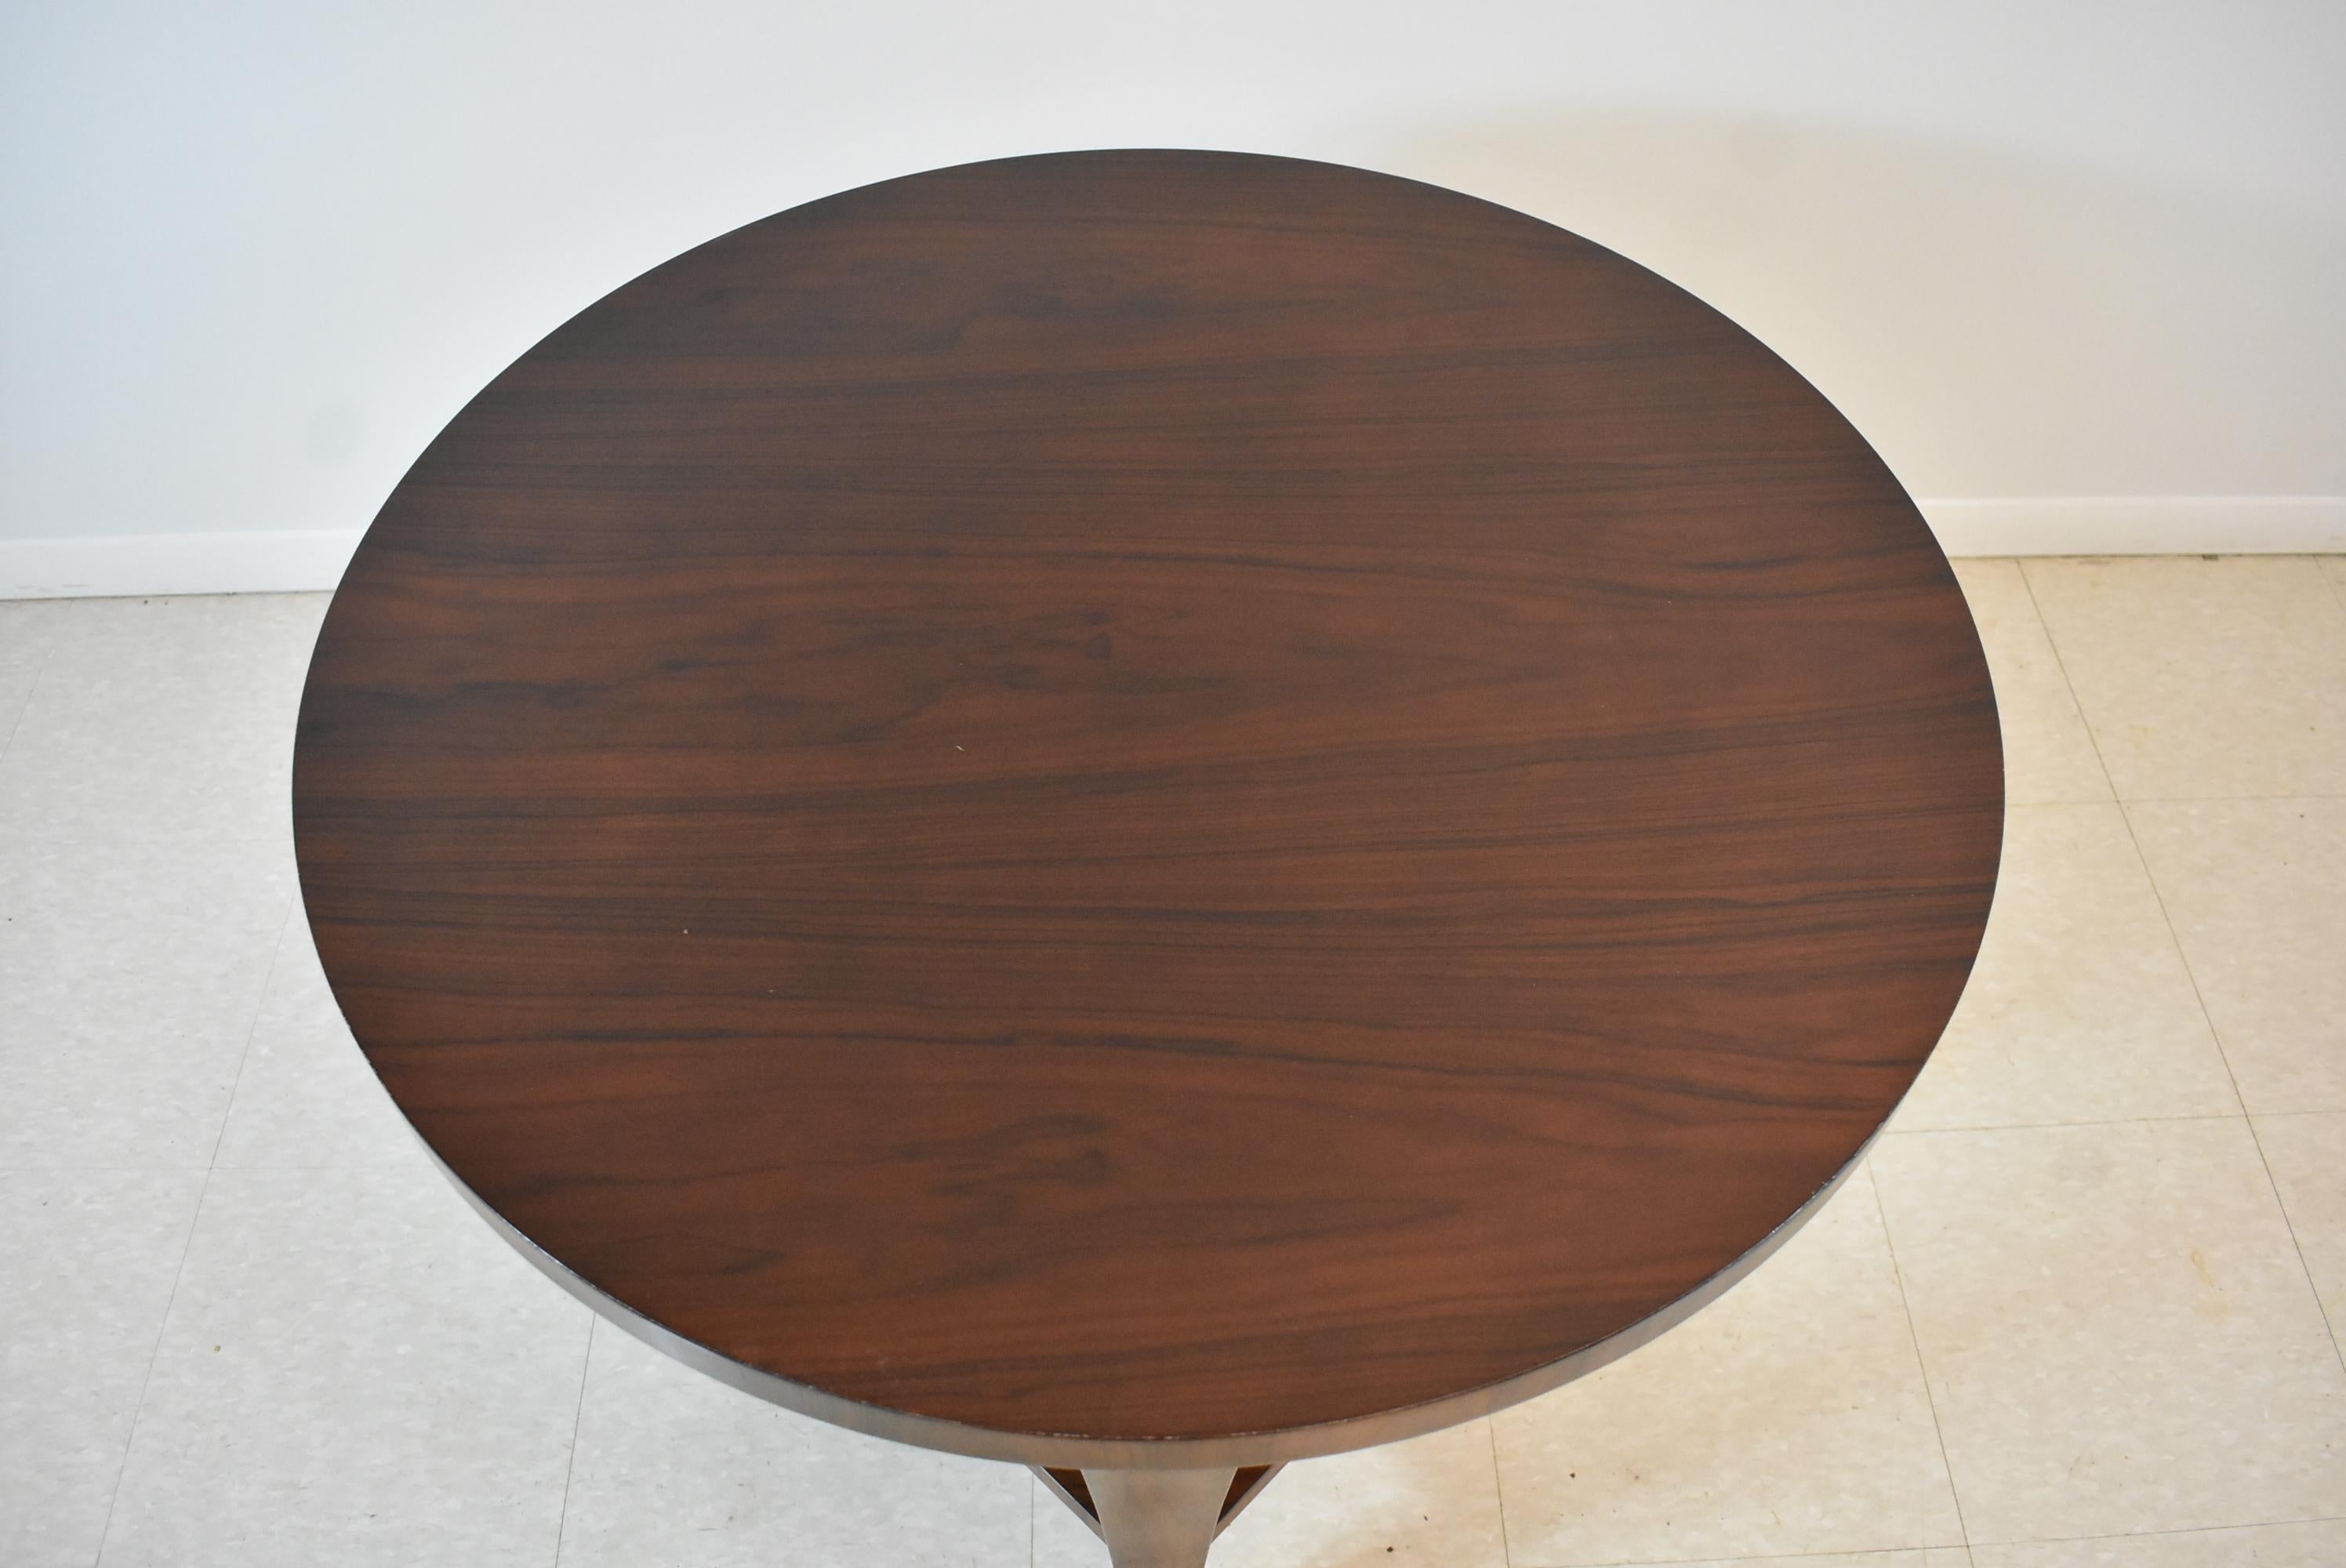 Rosewood occasional table by Baker Furniture for Barbara Barry. High style with chrome leg caps. Very good condition. Dimensions: 30